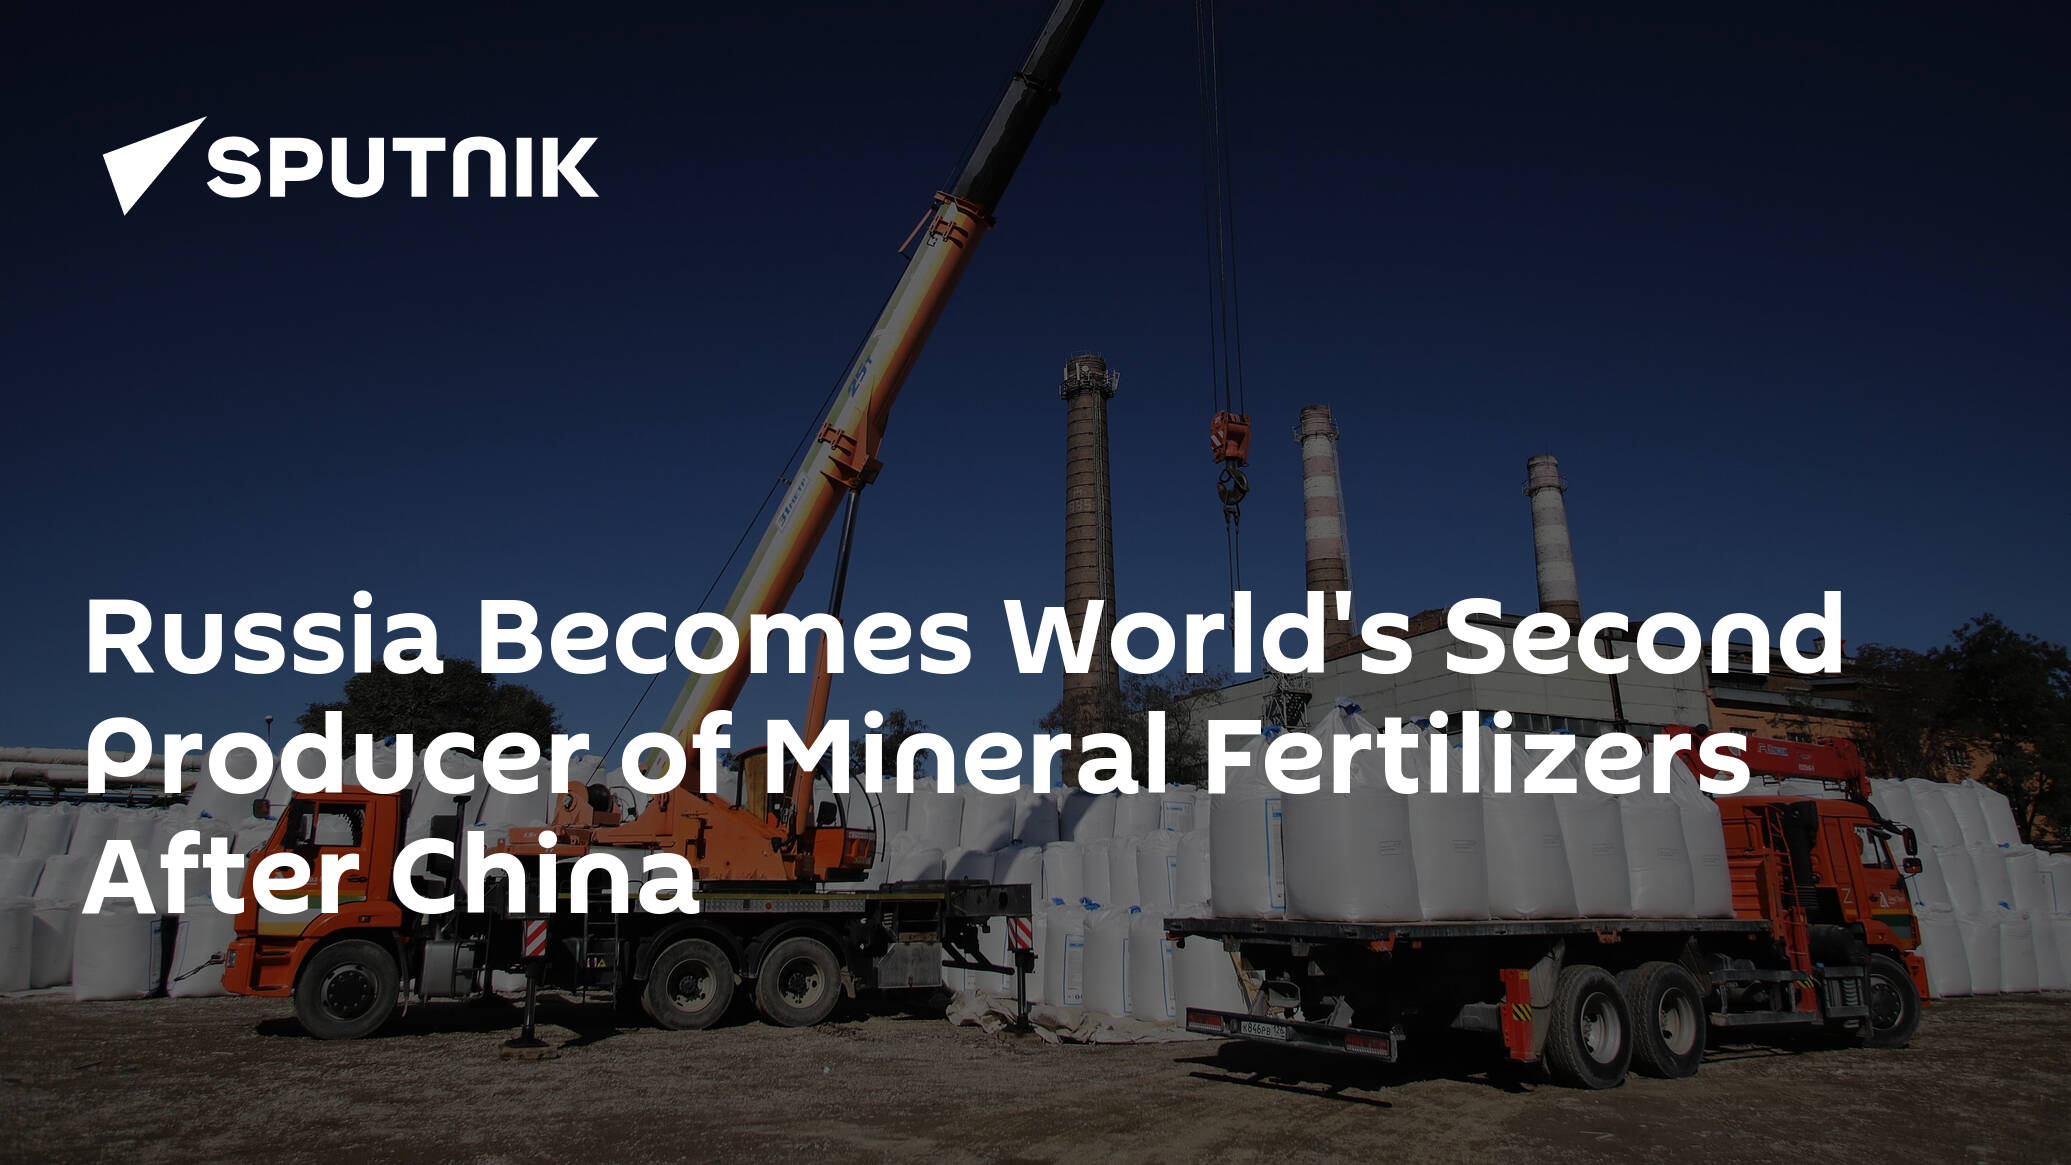 Russia Becomes World's Second Producer of Mineral Fertilizers After China